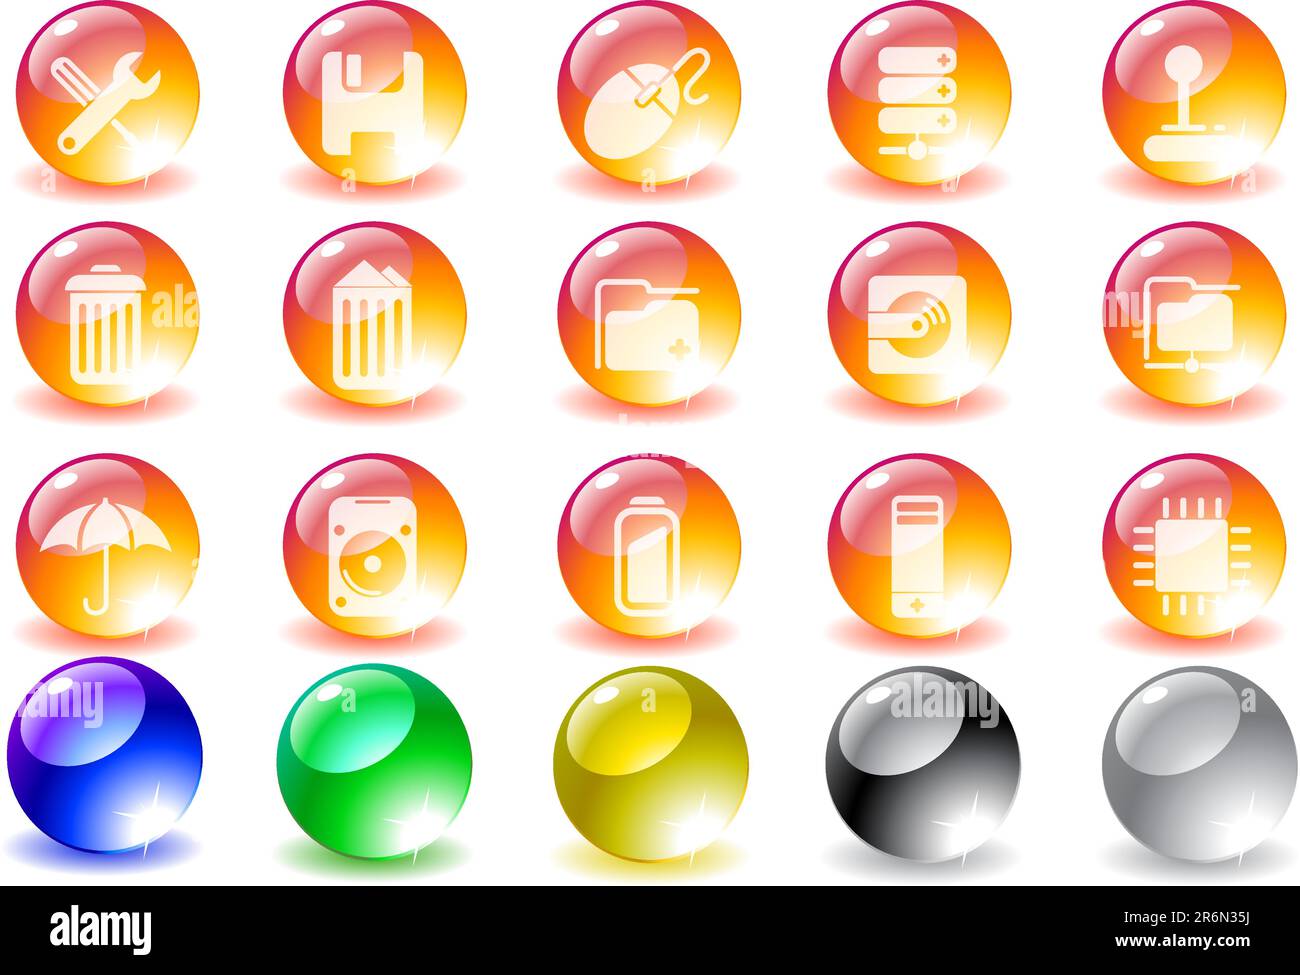 Computer and Data icons Stock Vector